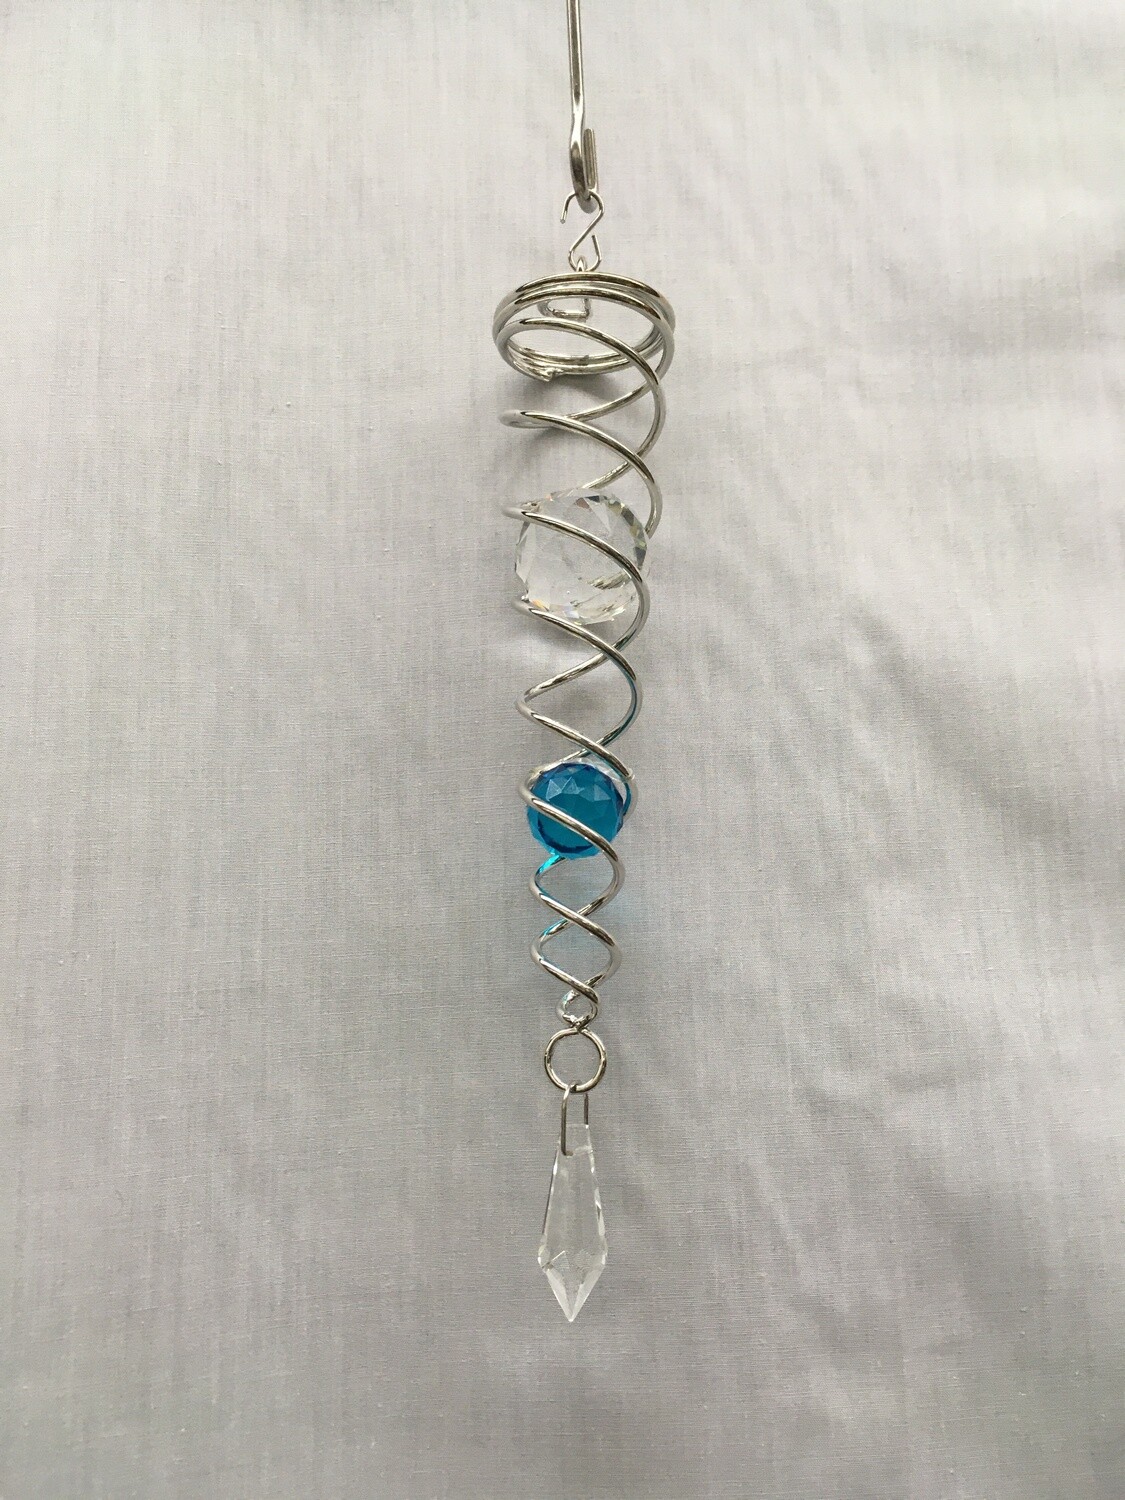 Small spiral Tail - Aqua and clear crystal balls